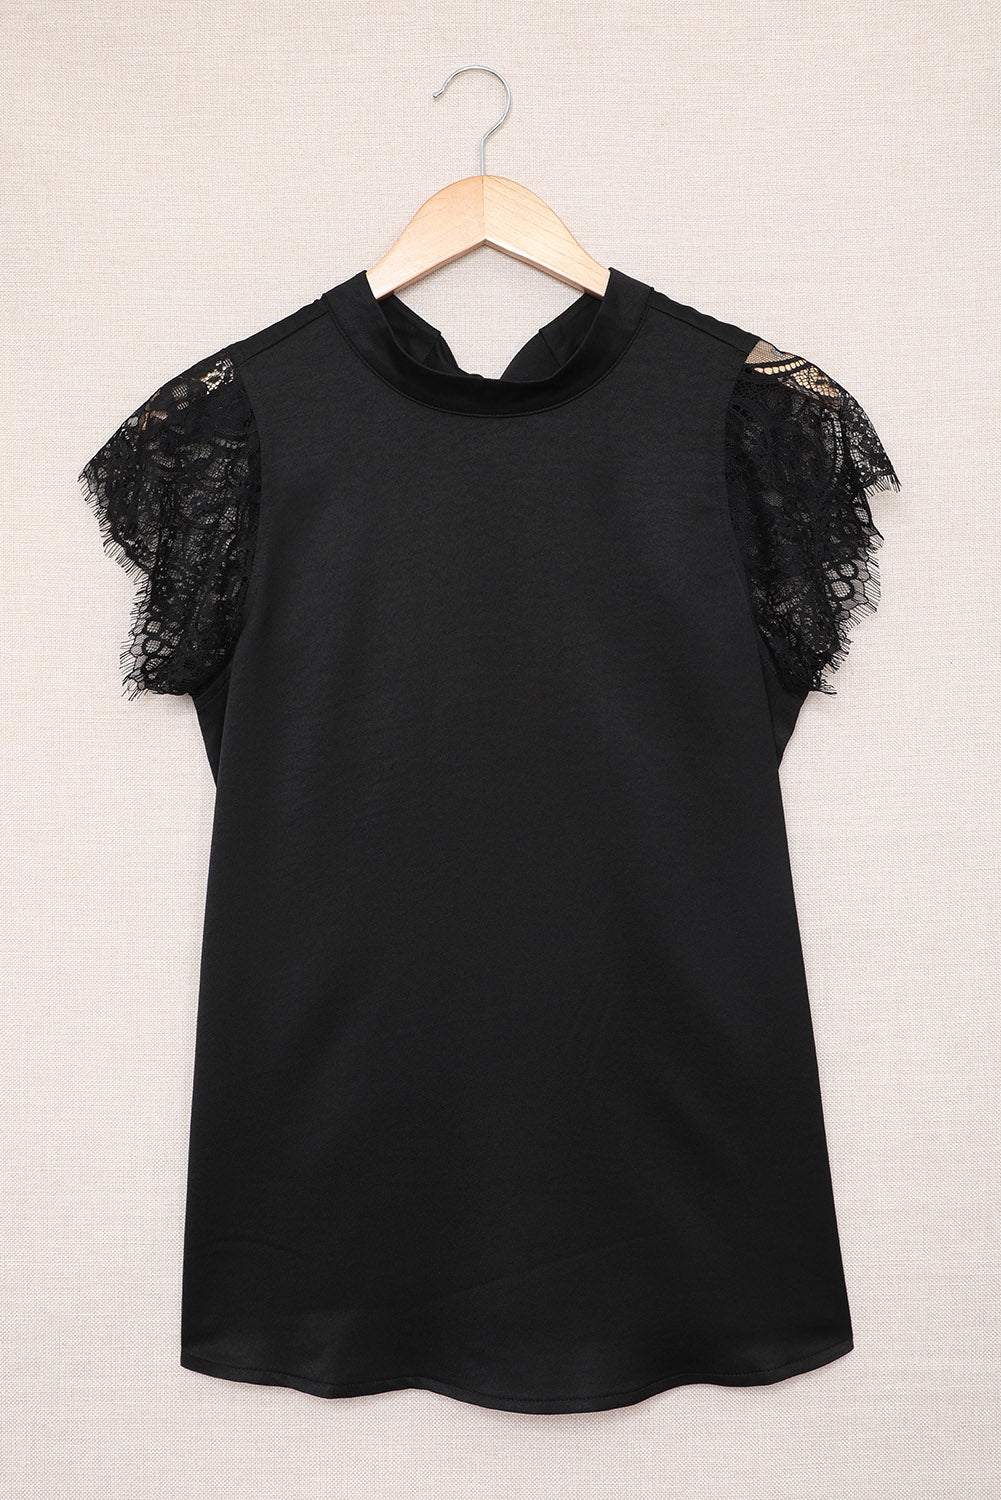 Lace Splicing Tie Knot Mock Neck T-Shirt